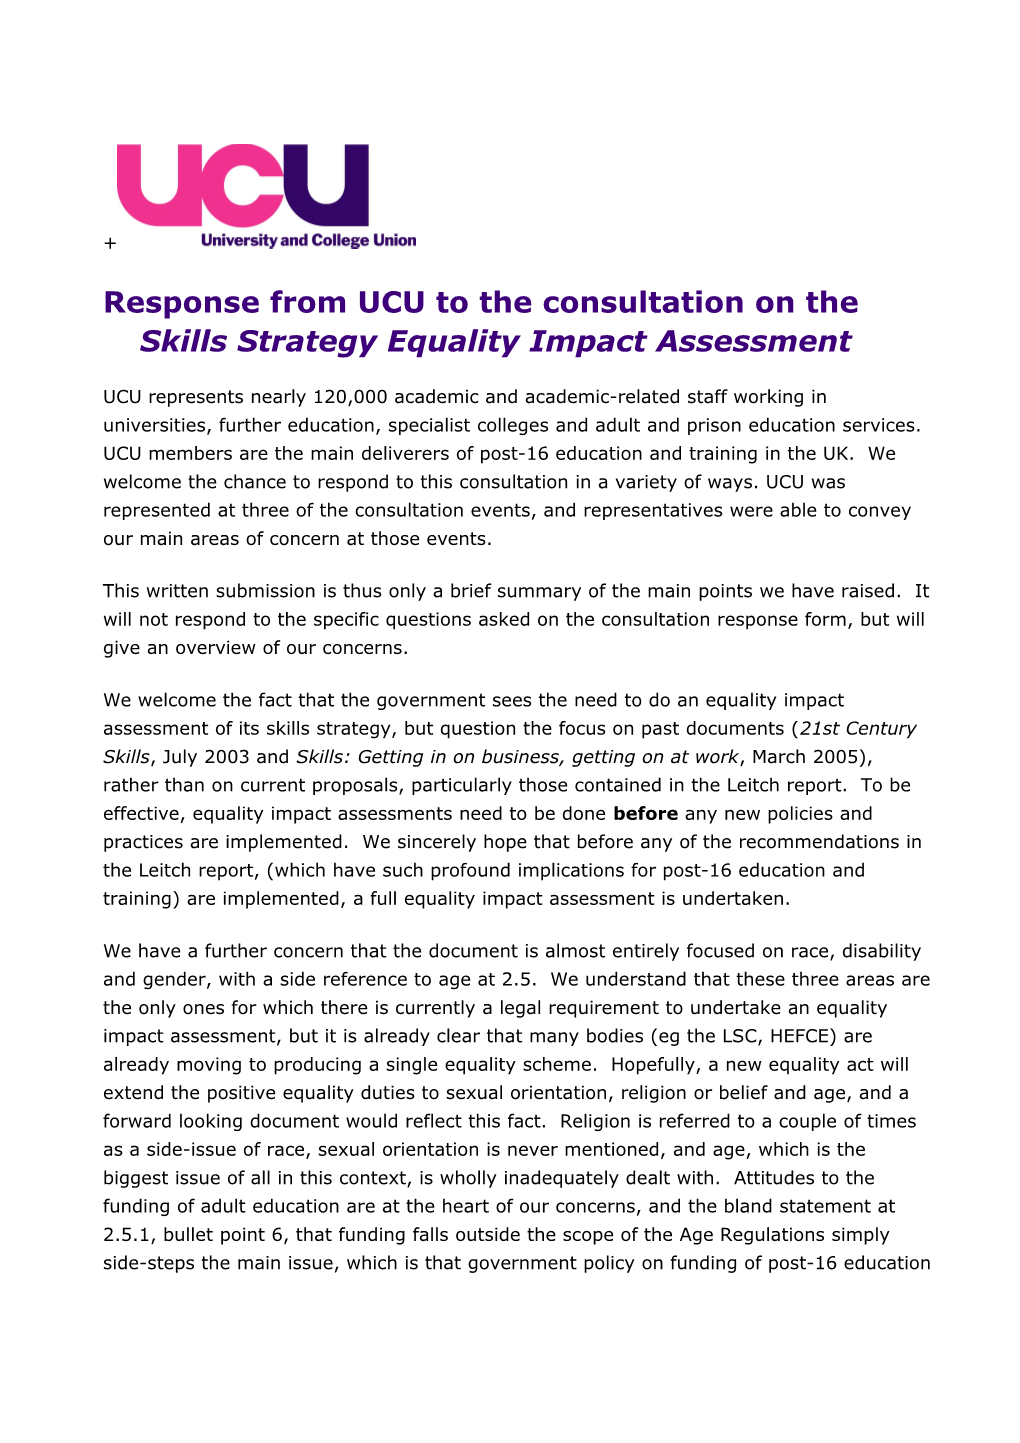 Response from UCU to the Consultation on the Skills Strategy Equality Impact Assessment